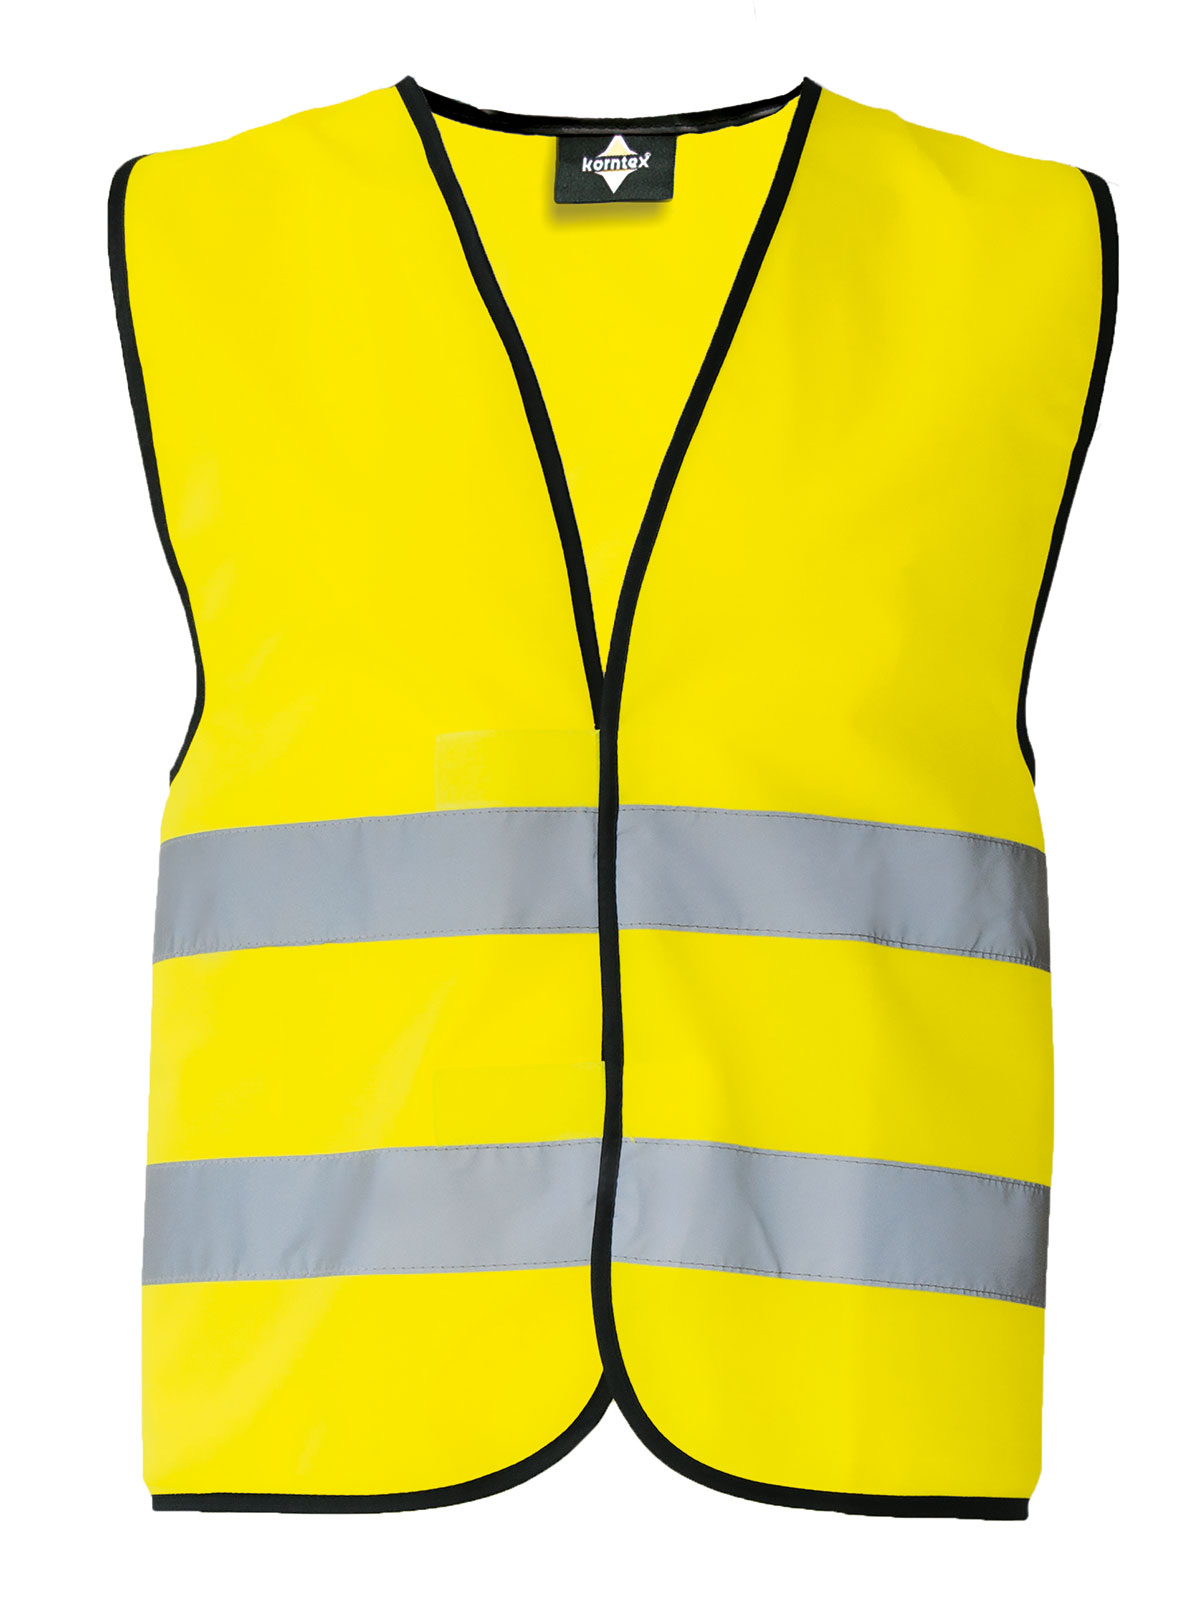 co2-neutral-safety-vest-yellow.webp